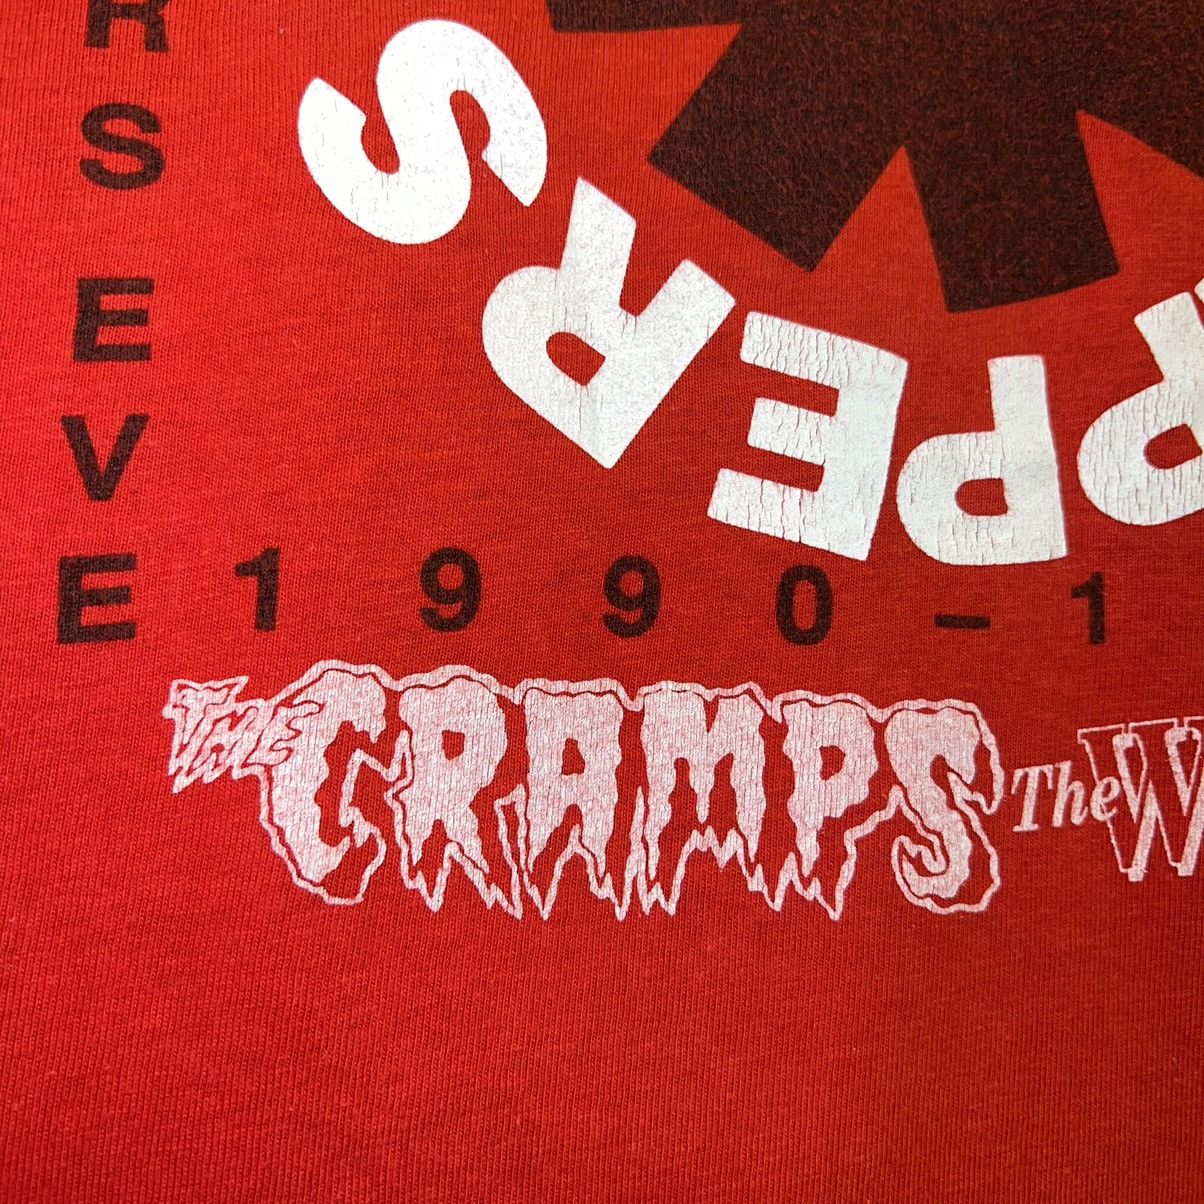 Vintage 1990 Red Hot Chili Peppers ft The Cramps & Weirdos Staff Tee Size US XL / EU 56 / 4 - 5 Thumbnail